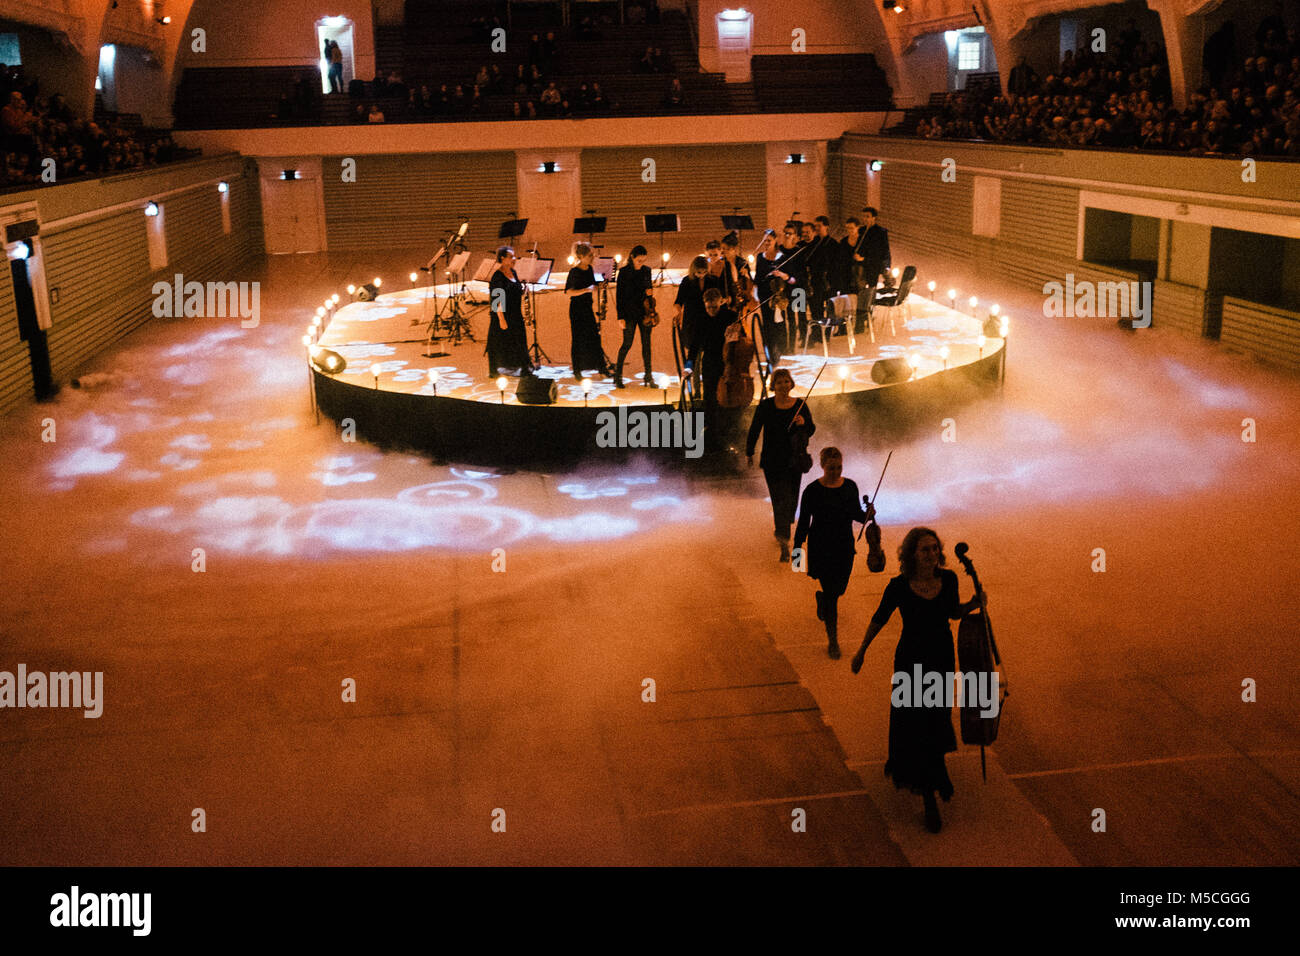 Denmark, Copenhagen - February 20, 2018. The Danish Chamber Orchestra performs a live concert at Idrætshuset during the Danish music festival Frost Festival 2018 in Copenhagen. (Photo credit: Gonzales Photo - Malthe Ivarsson). Stock Photo